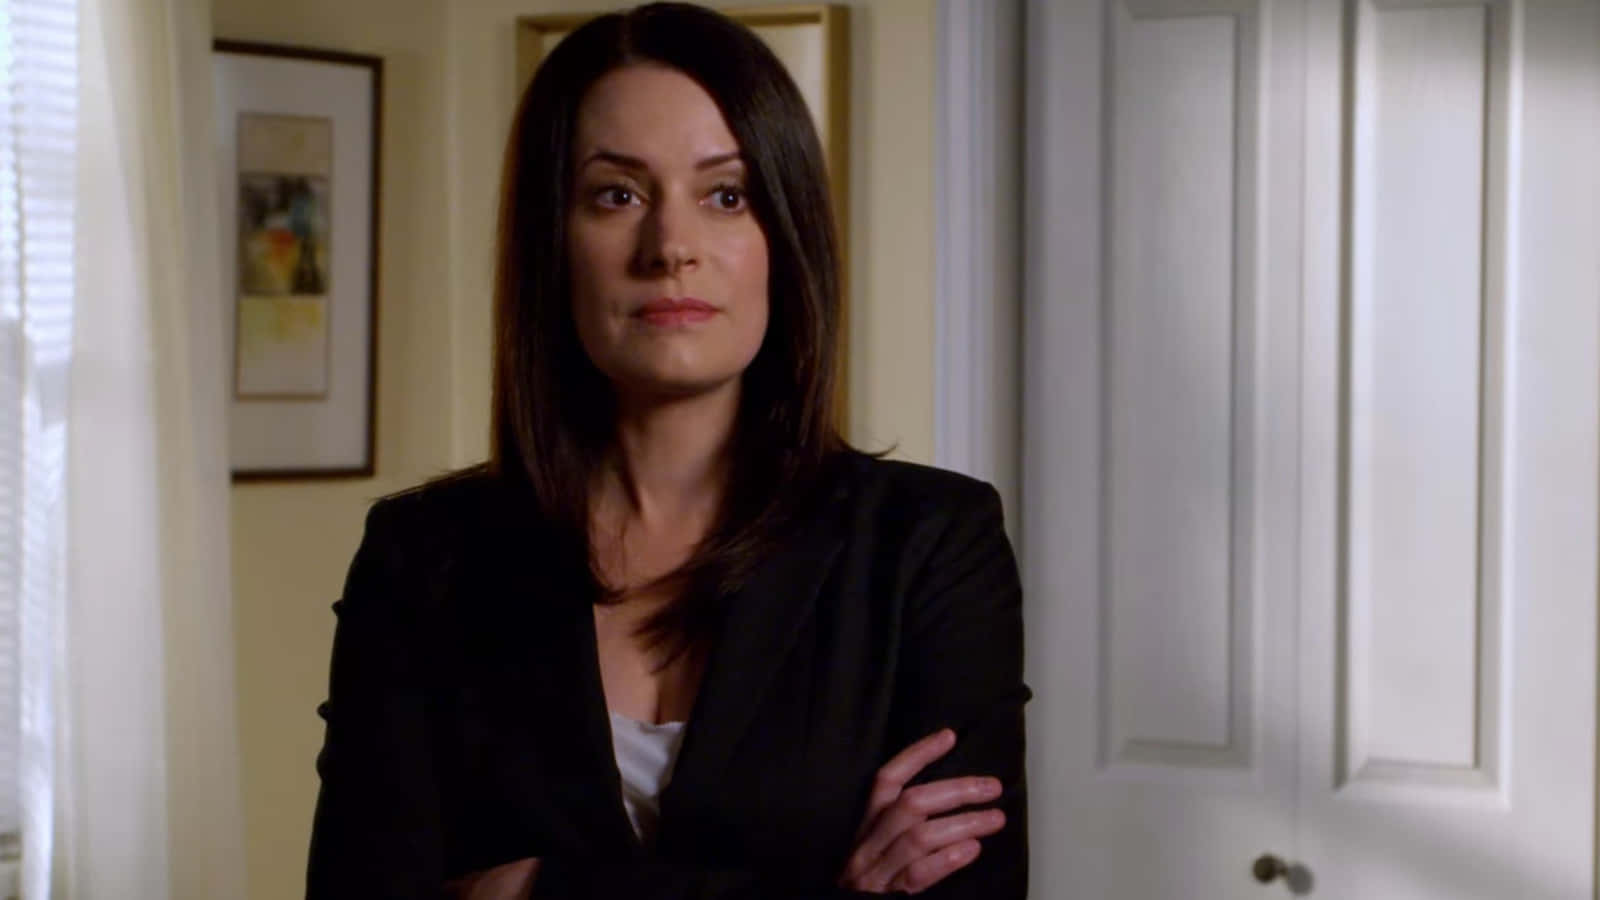 Paget Brewster Striking A Pose In A Stylish Outfit